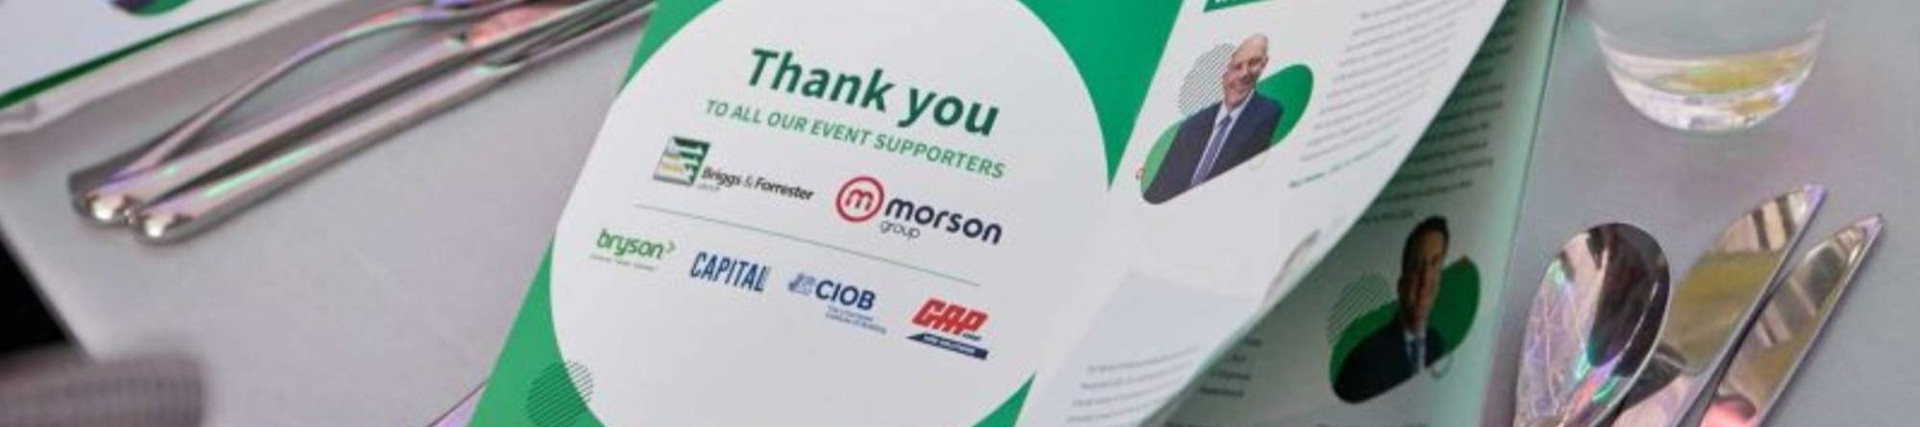 Morson sponsored Best of British lunch raises £56,000 for ParalympicsGB